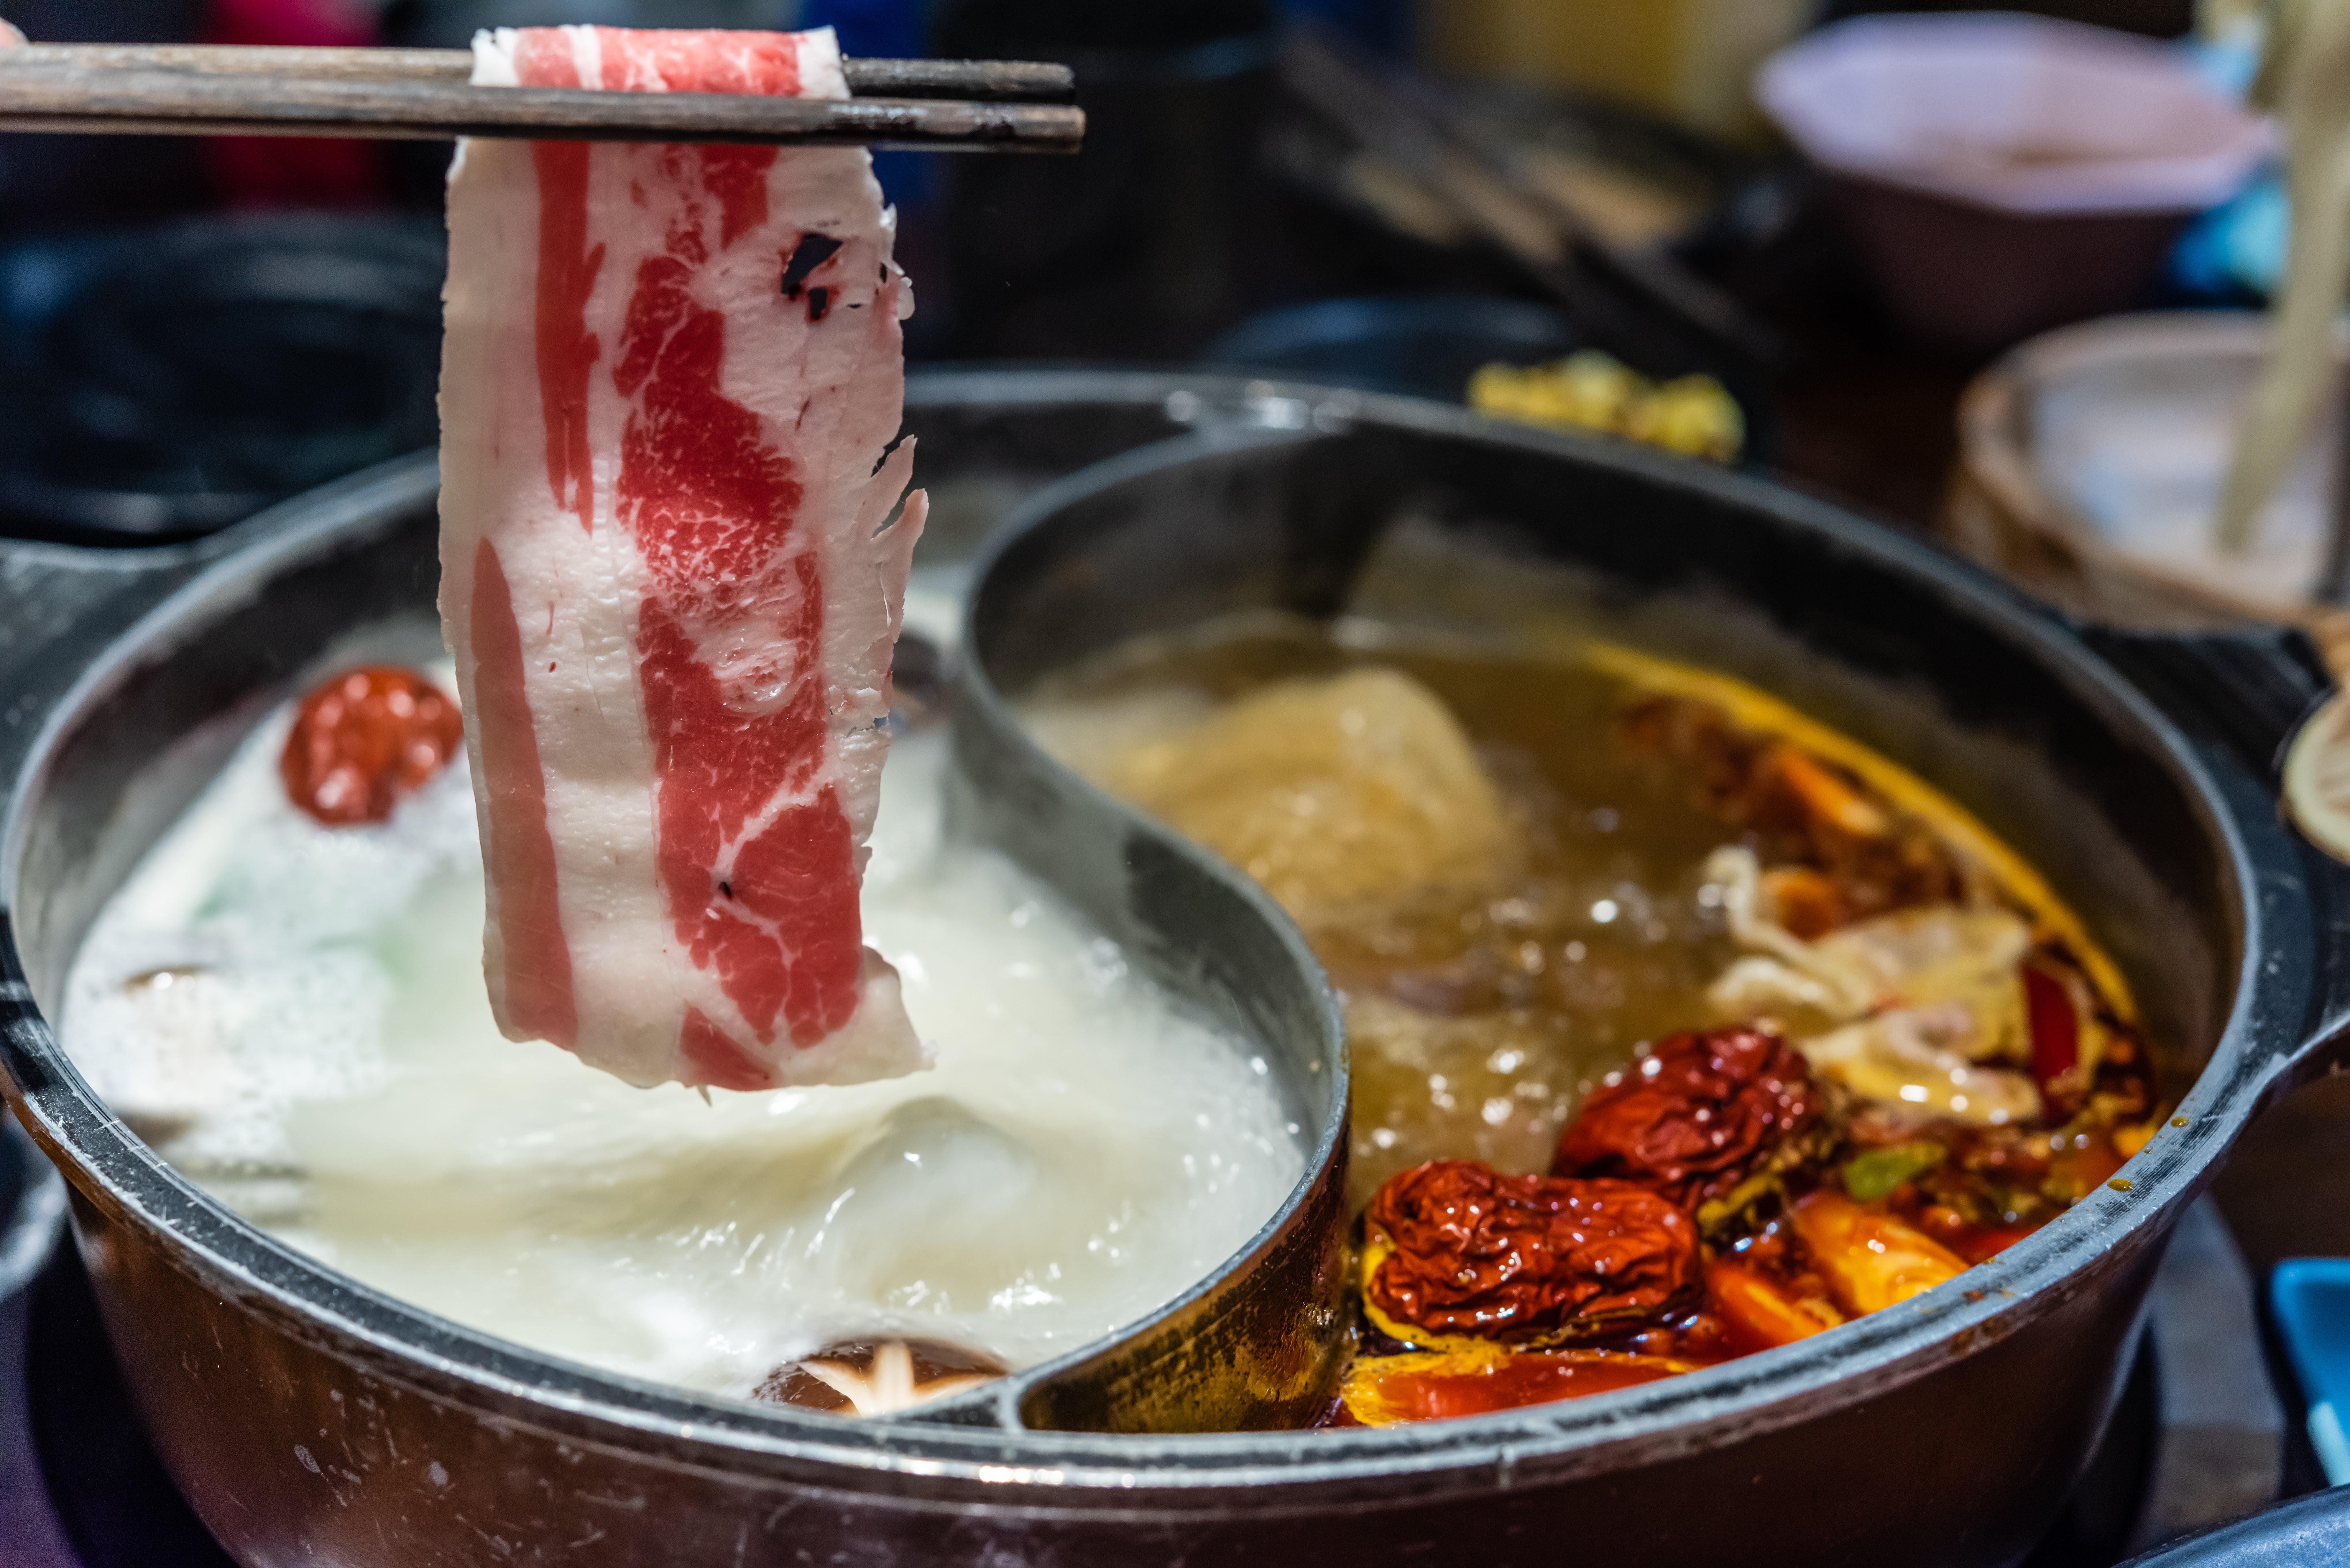 Sitting around a steamy hotpot, with mutton as an indispensable ingredient, especially in chilly autumn and cold winter has been a favourite for many Chinese people